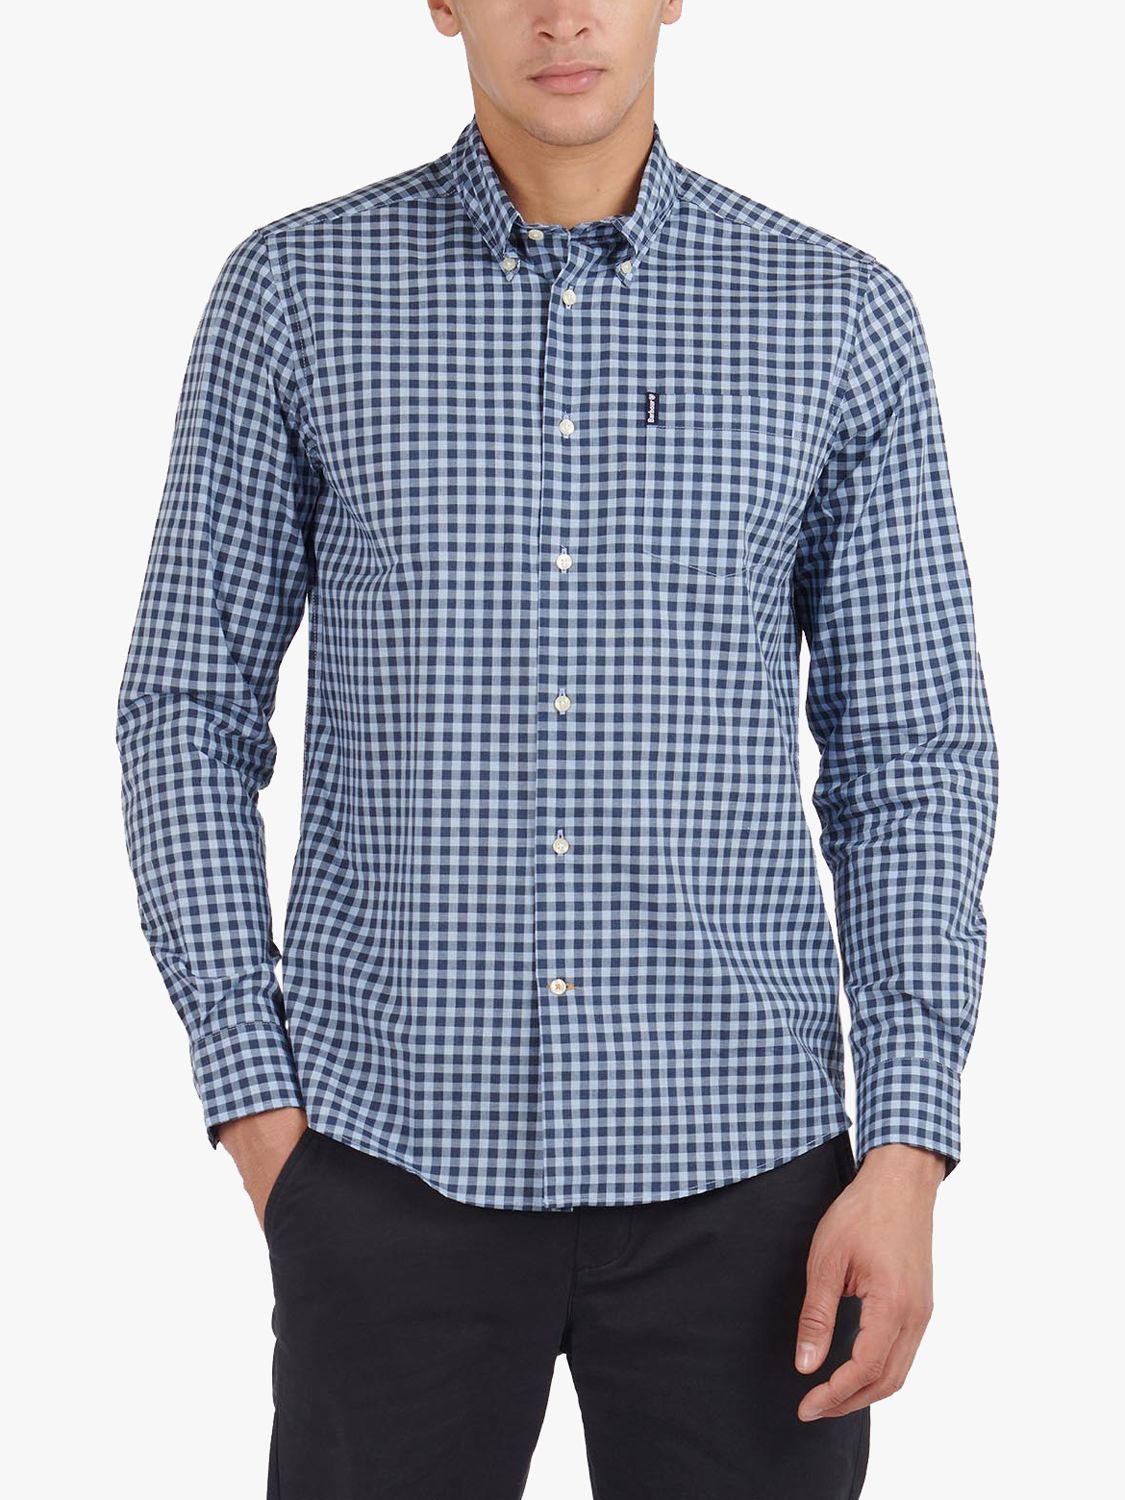 Barbour Lifestyle Gingham Check Button Down Collar Shirt, Blue/Multi at ...